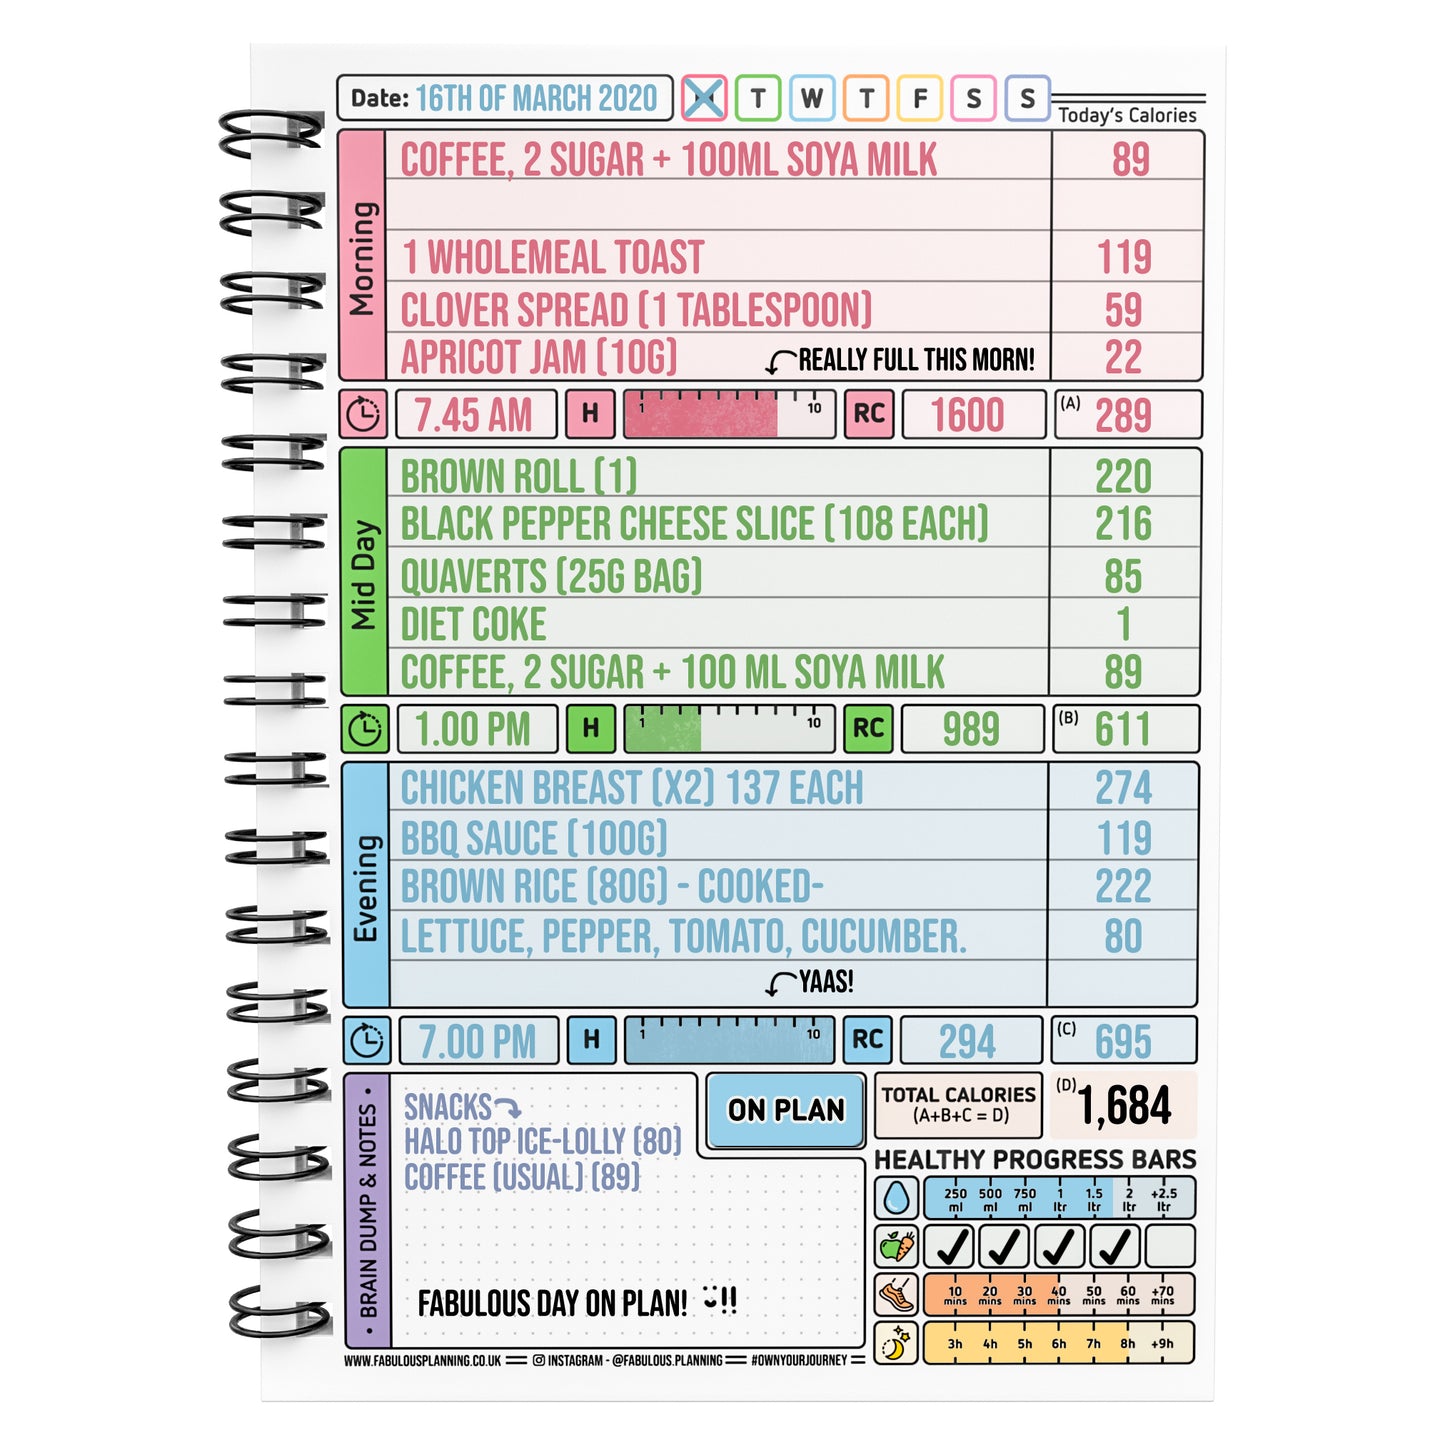 Food Diary - C7 - Calorie Counting